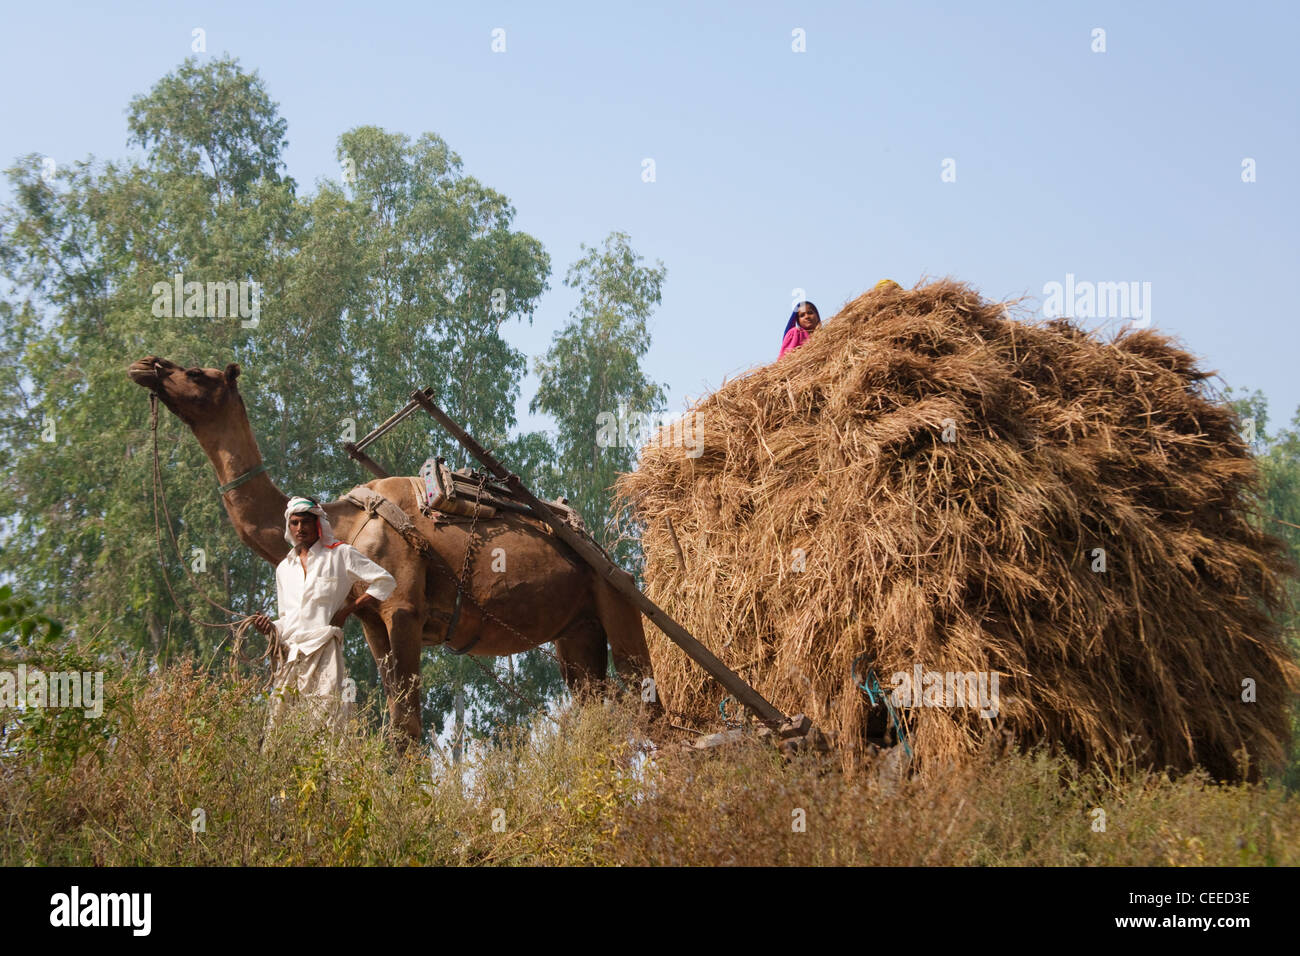 Camel cart carrying harvested wheat, Agra, India Stock Photo